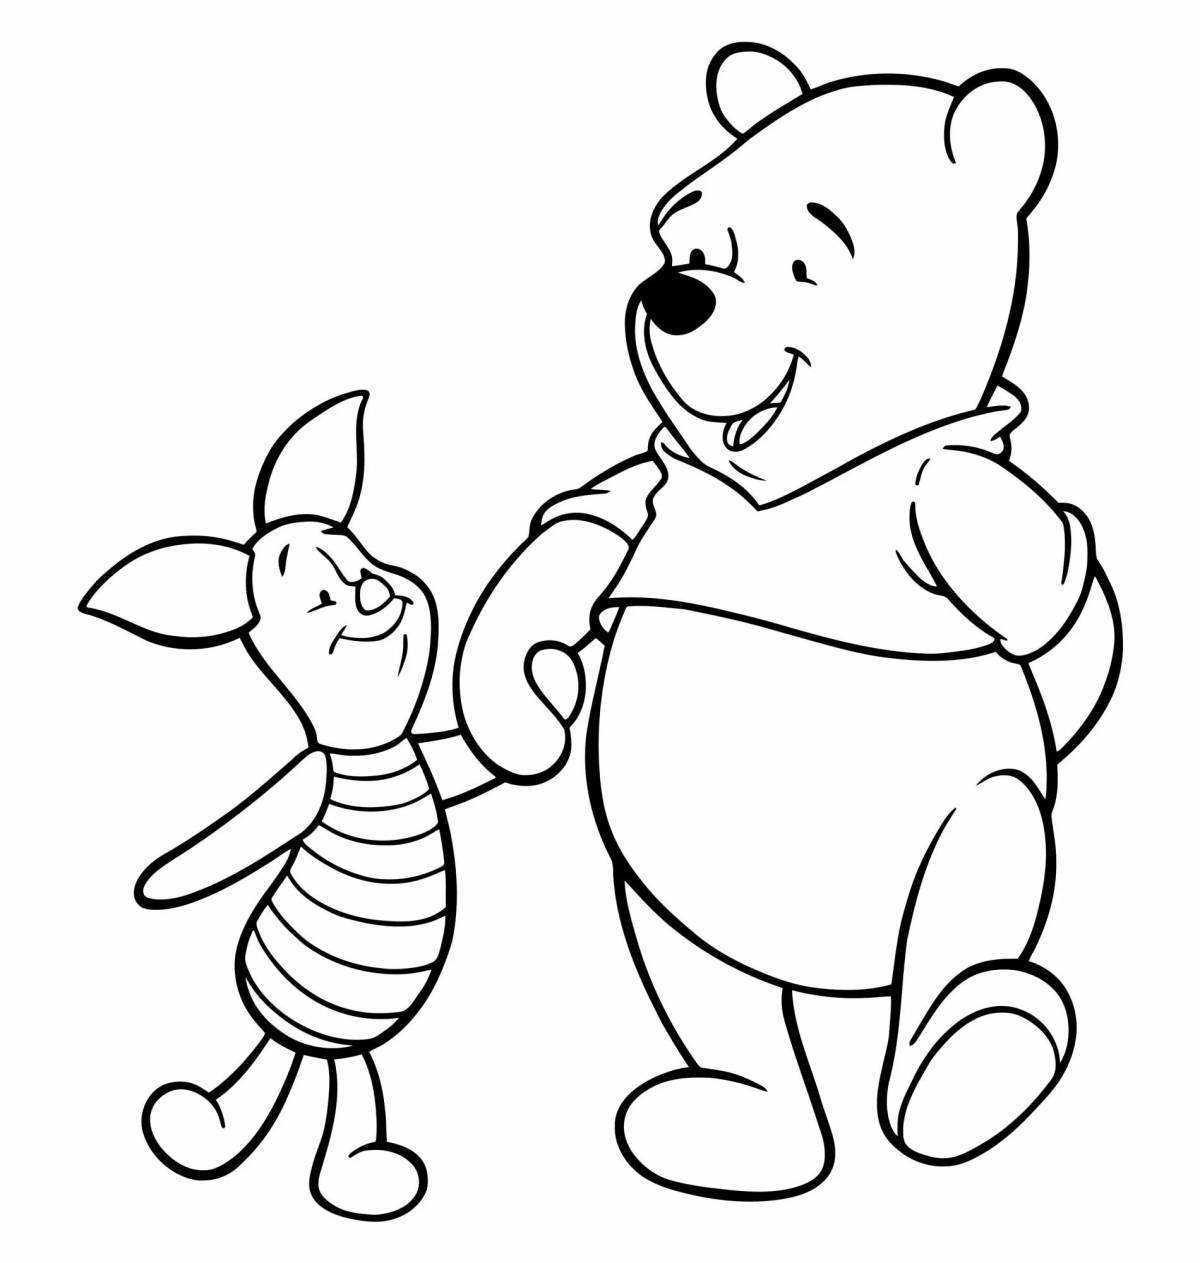 Great winnie the pooh coloring book for kids